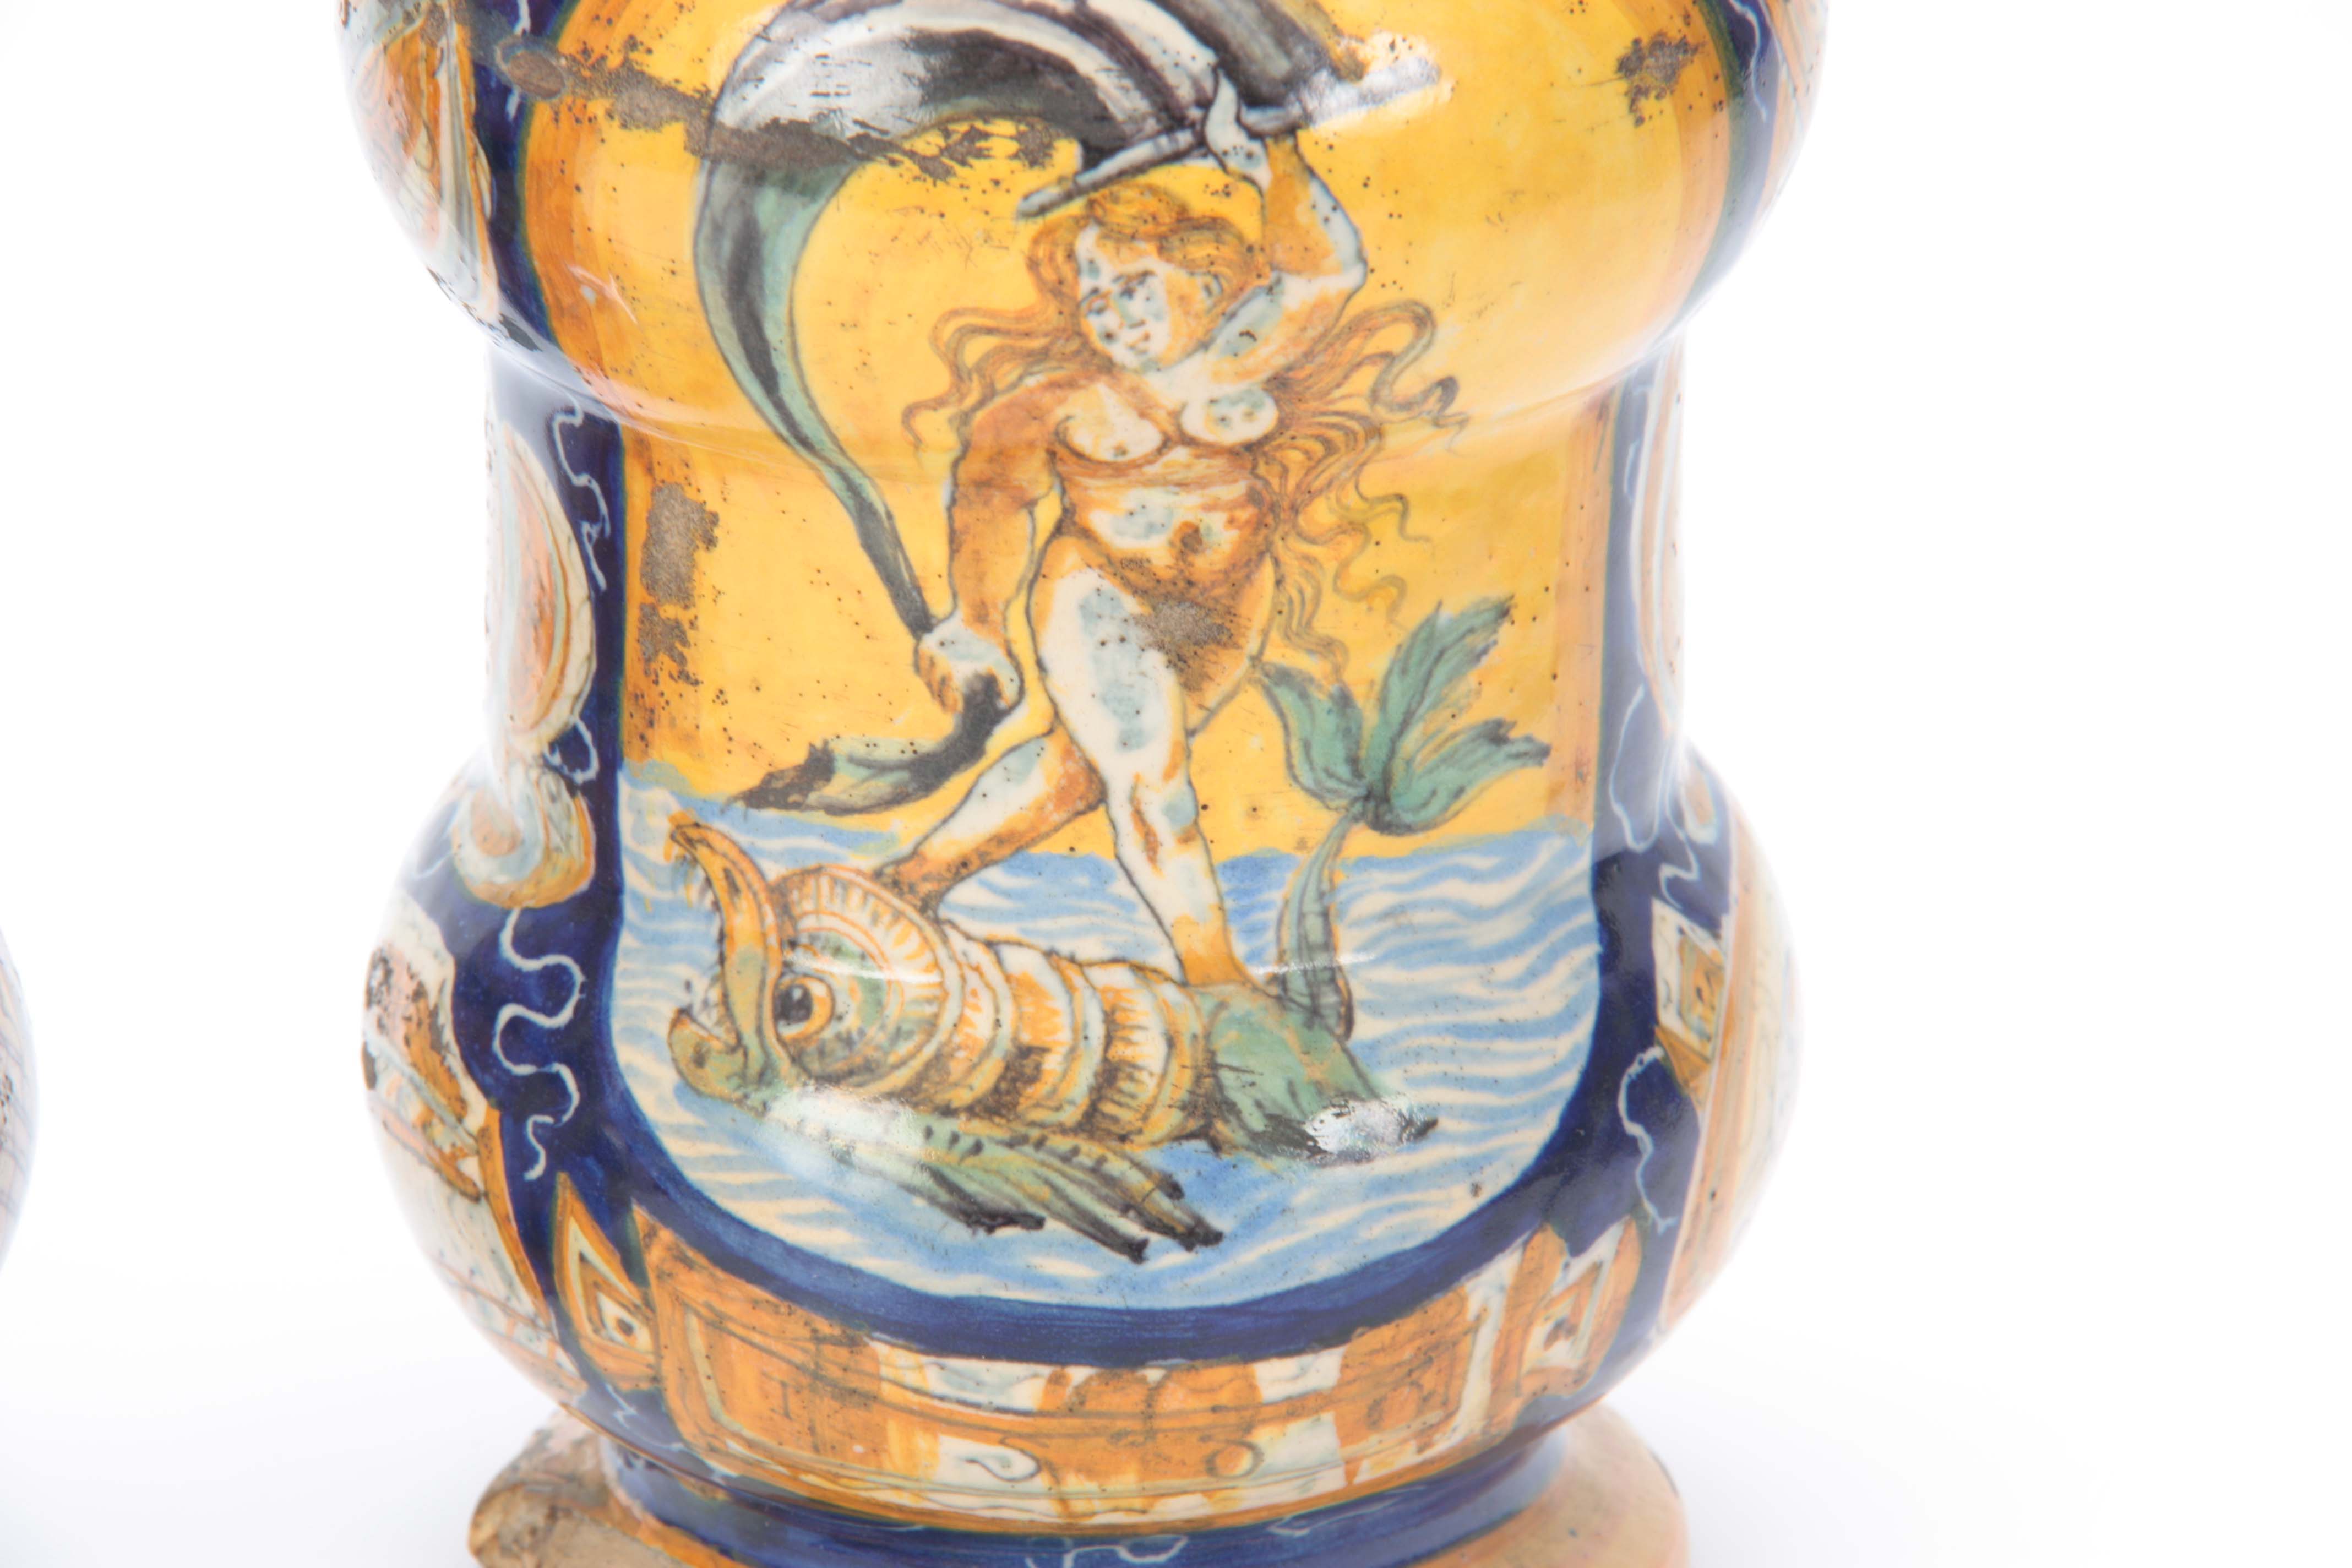 A PAIR OF CASTEL DURANTE MAIOLICA ALBARELLI DATED 1580 each painted with Venus riding a dolphin - Image 4 of 7